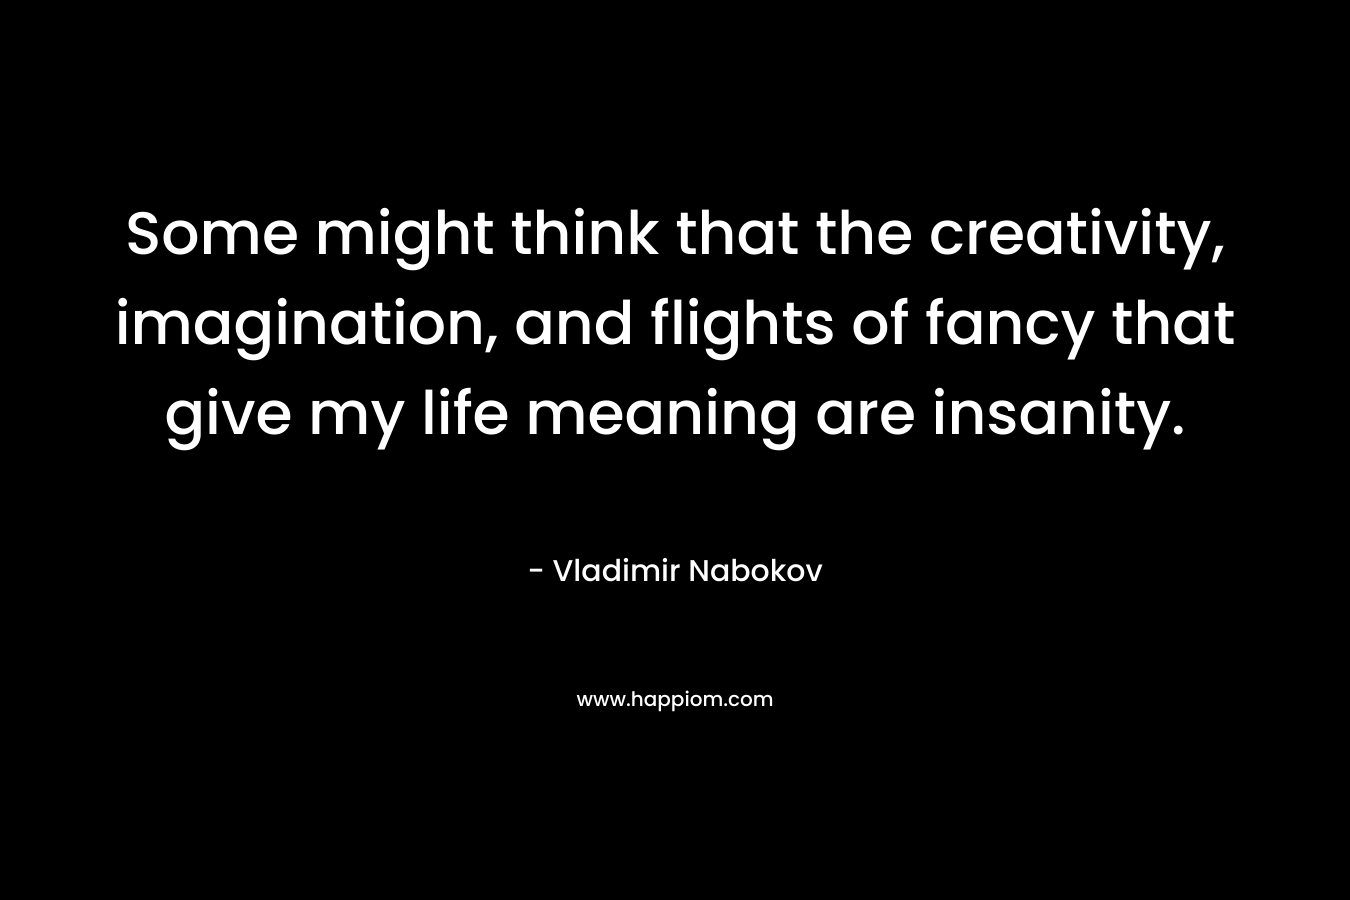 Some might think that the creativity, imagination, and flights of fancy that give my life meaning are insanity. – Vladimir Nabokov